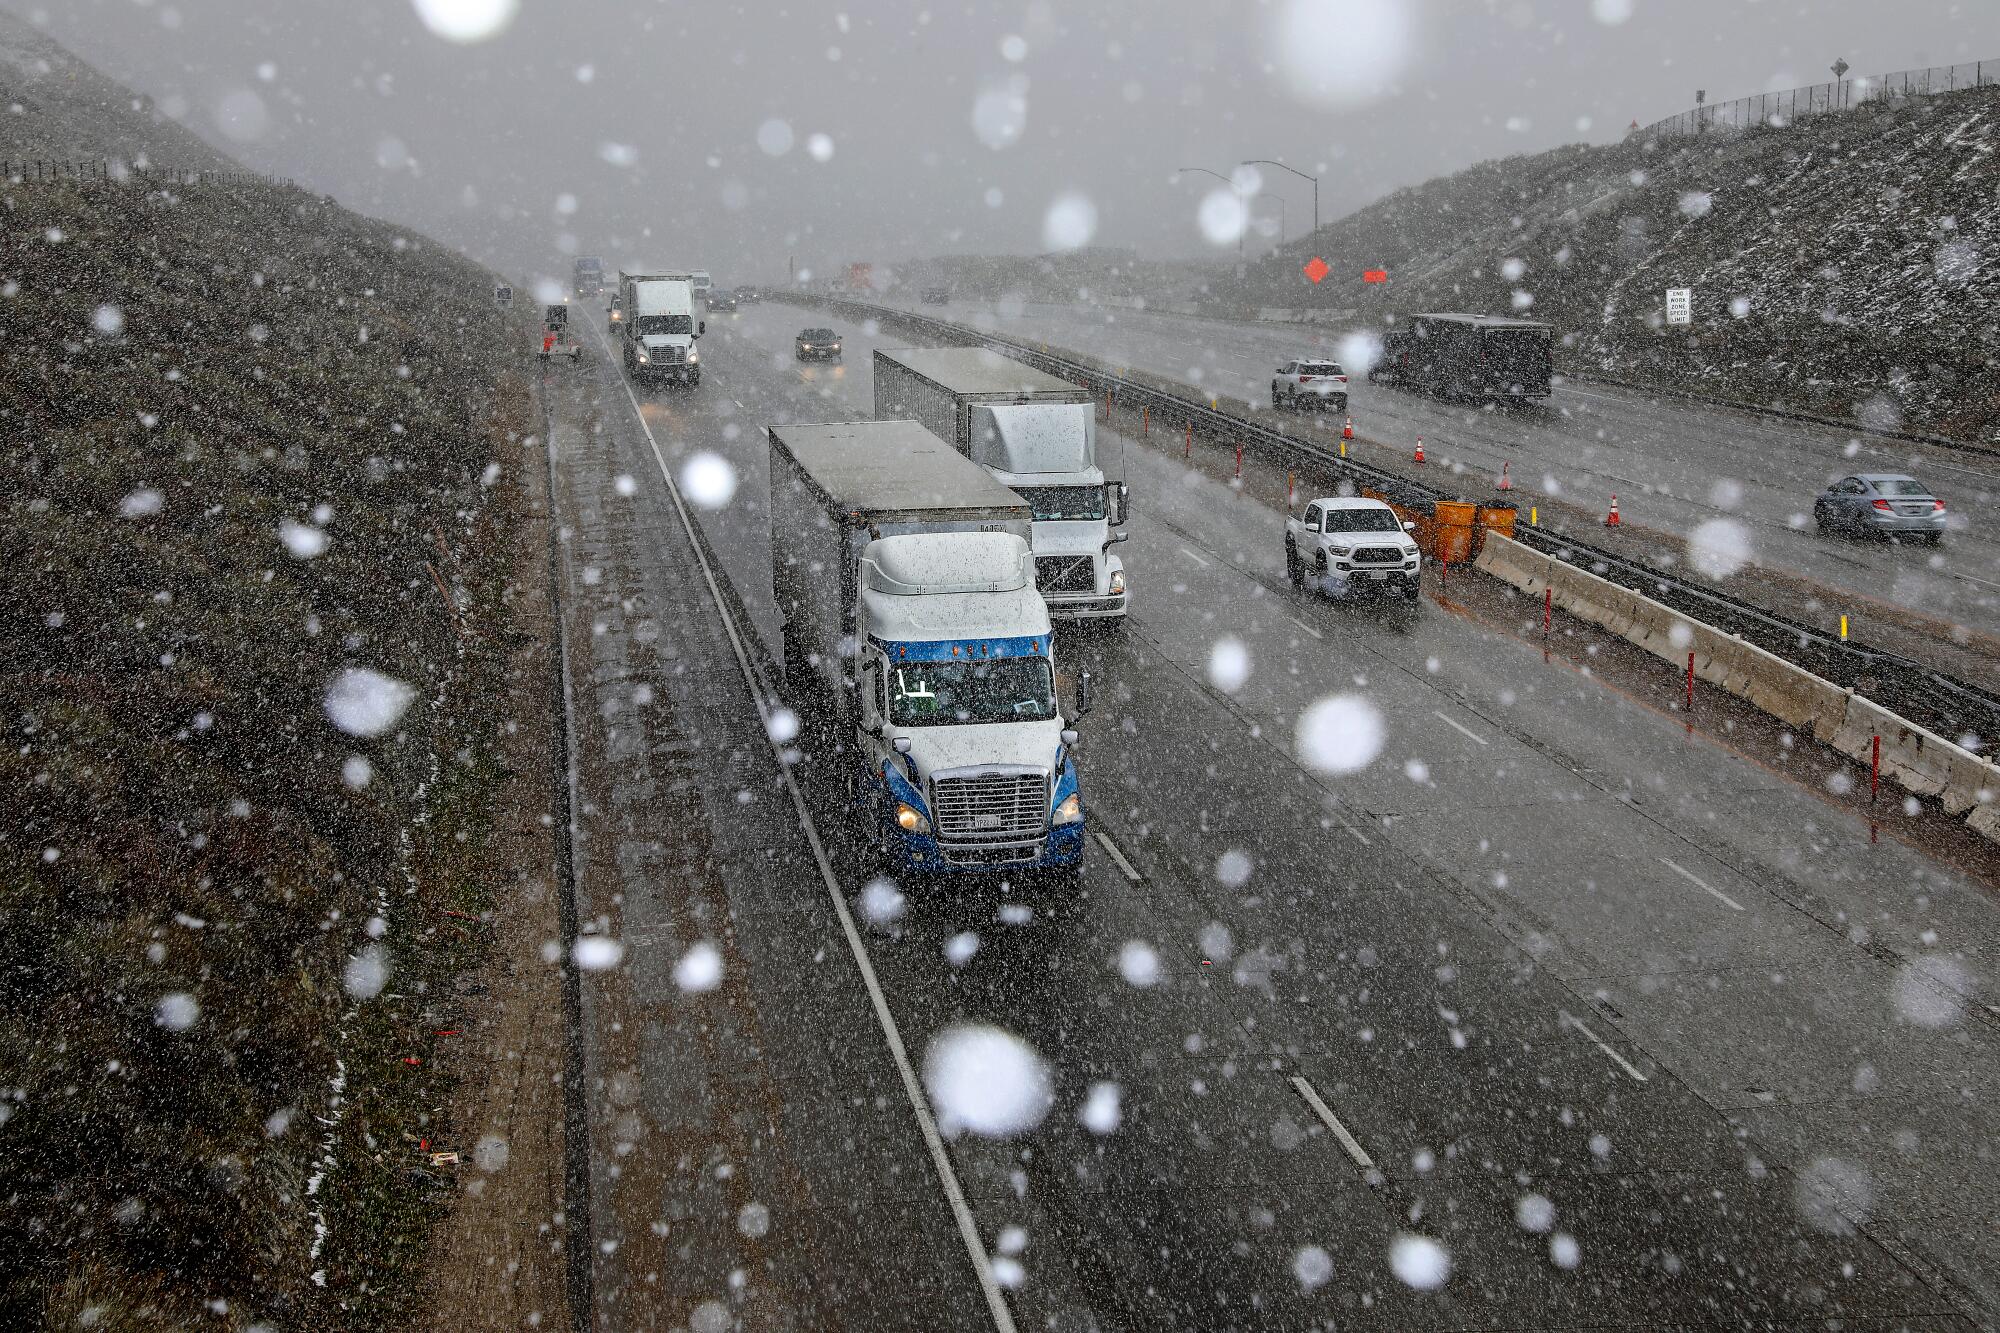 Snow flurries fall while vehicles travel along Interstate 5 in the Grapevine area on Thursday.